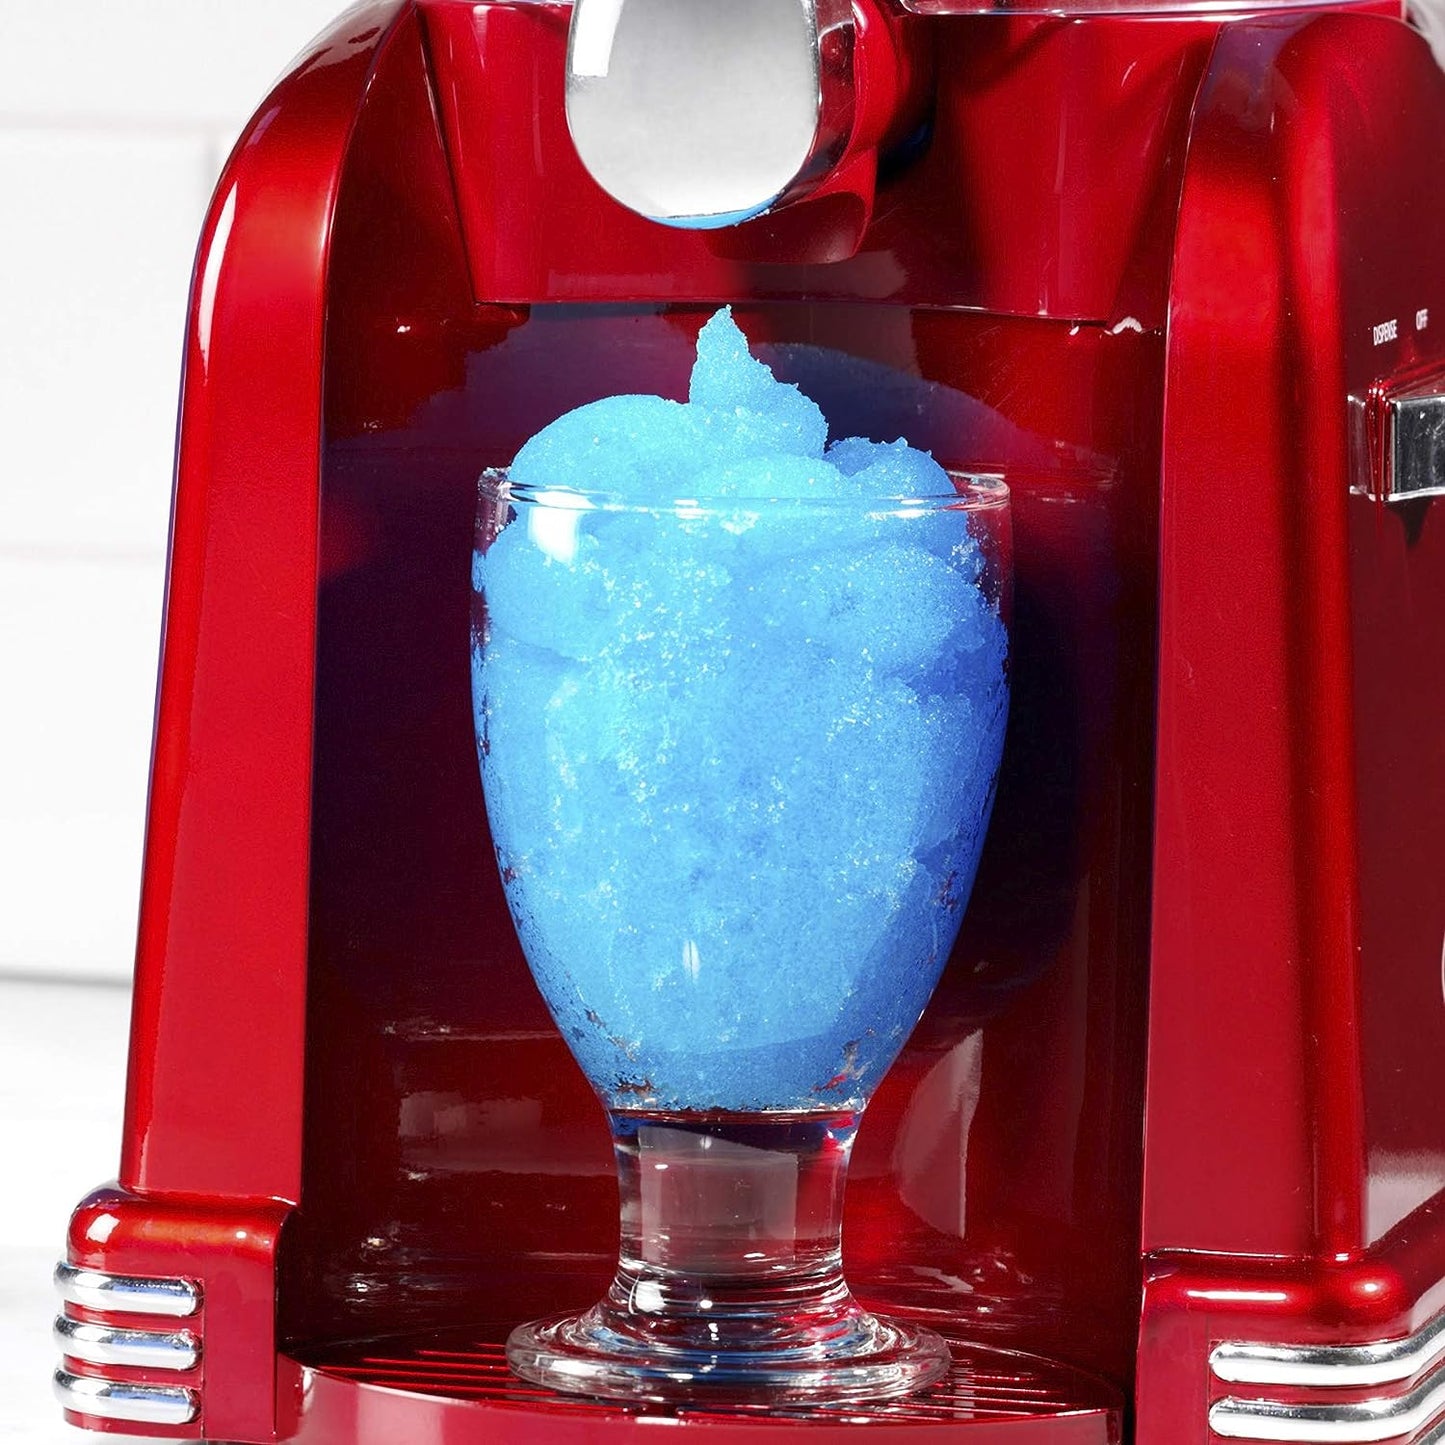 Frozen Drink Maker and Margarita Machine for Home - 32-Ounce Slushy Maker with Stainless Steel Flow Spout - Easy to Clean and Double Insulated - Retro Red